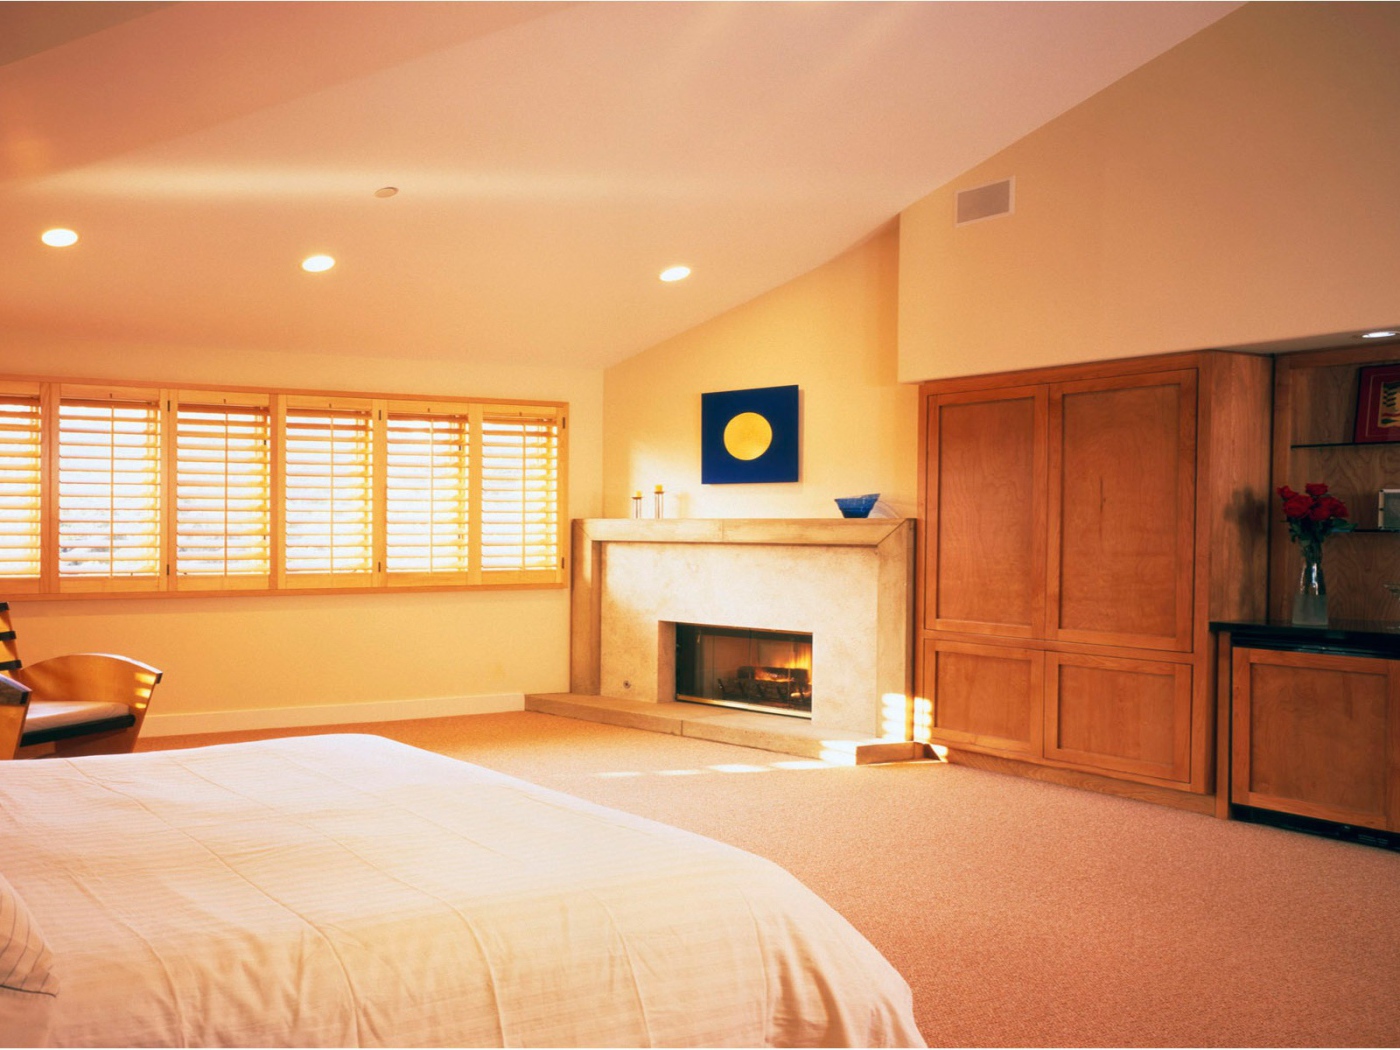 Bedroom with fireplace on a summer residence